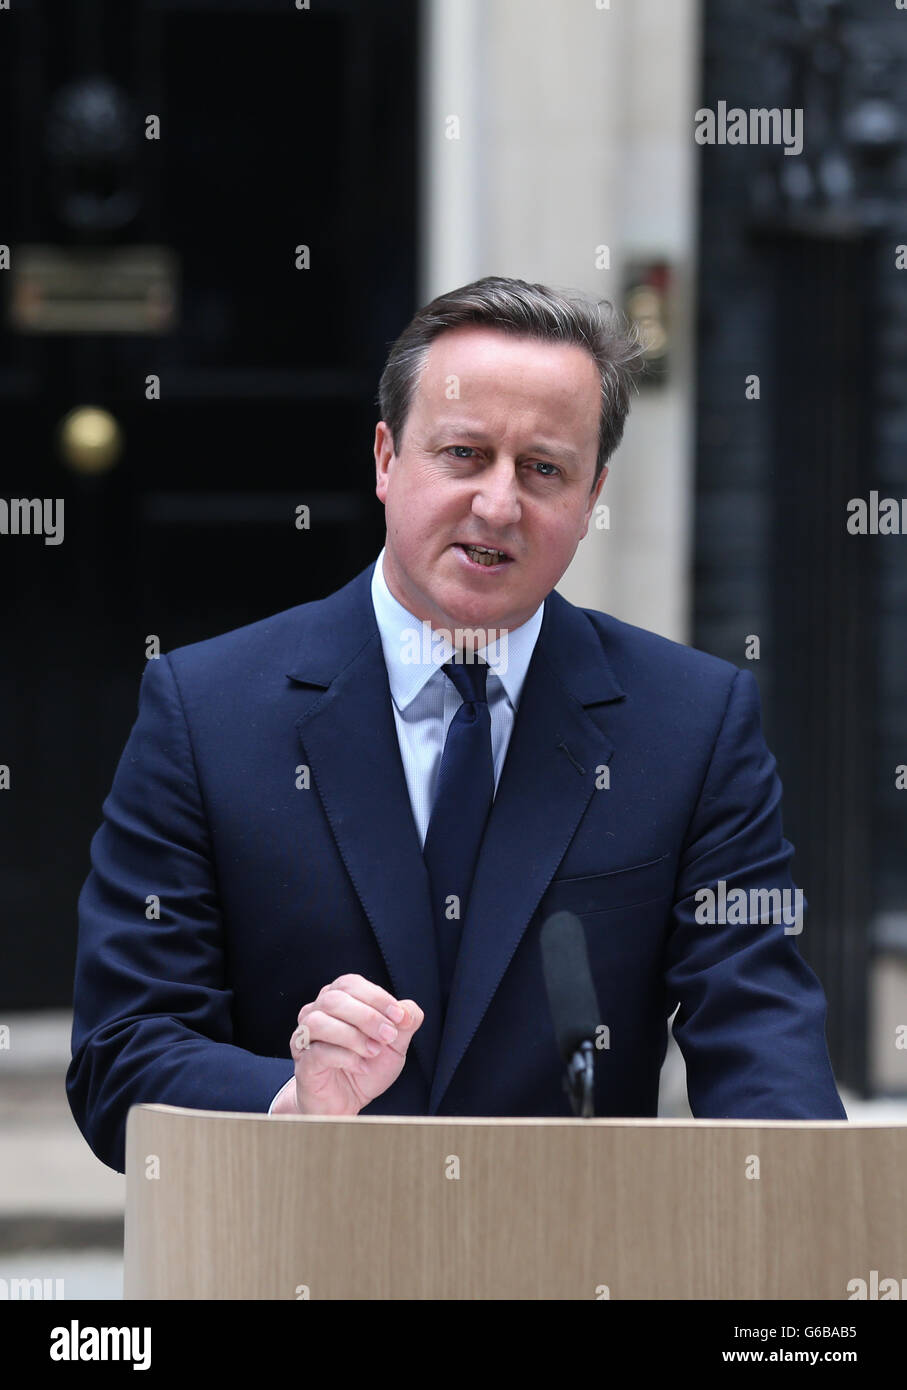 London, UK. 21st June, 2016. File photo taken on June 21, 2016 shows British Prime Minister David Cameron delivering a speech at 10 Downing Street in London. British Prime Minister David Cameron announced his resignation on Friday. © Han Yan/Xinhua/Alamy Live News Stock Photo